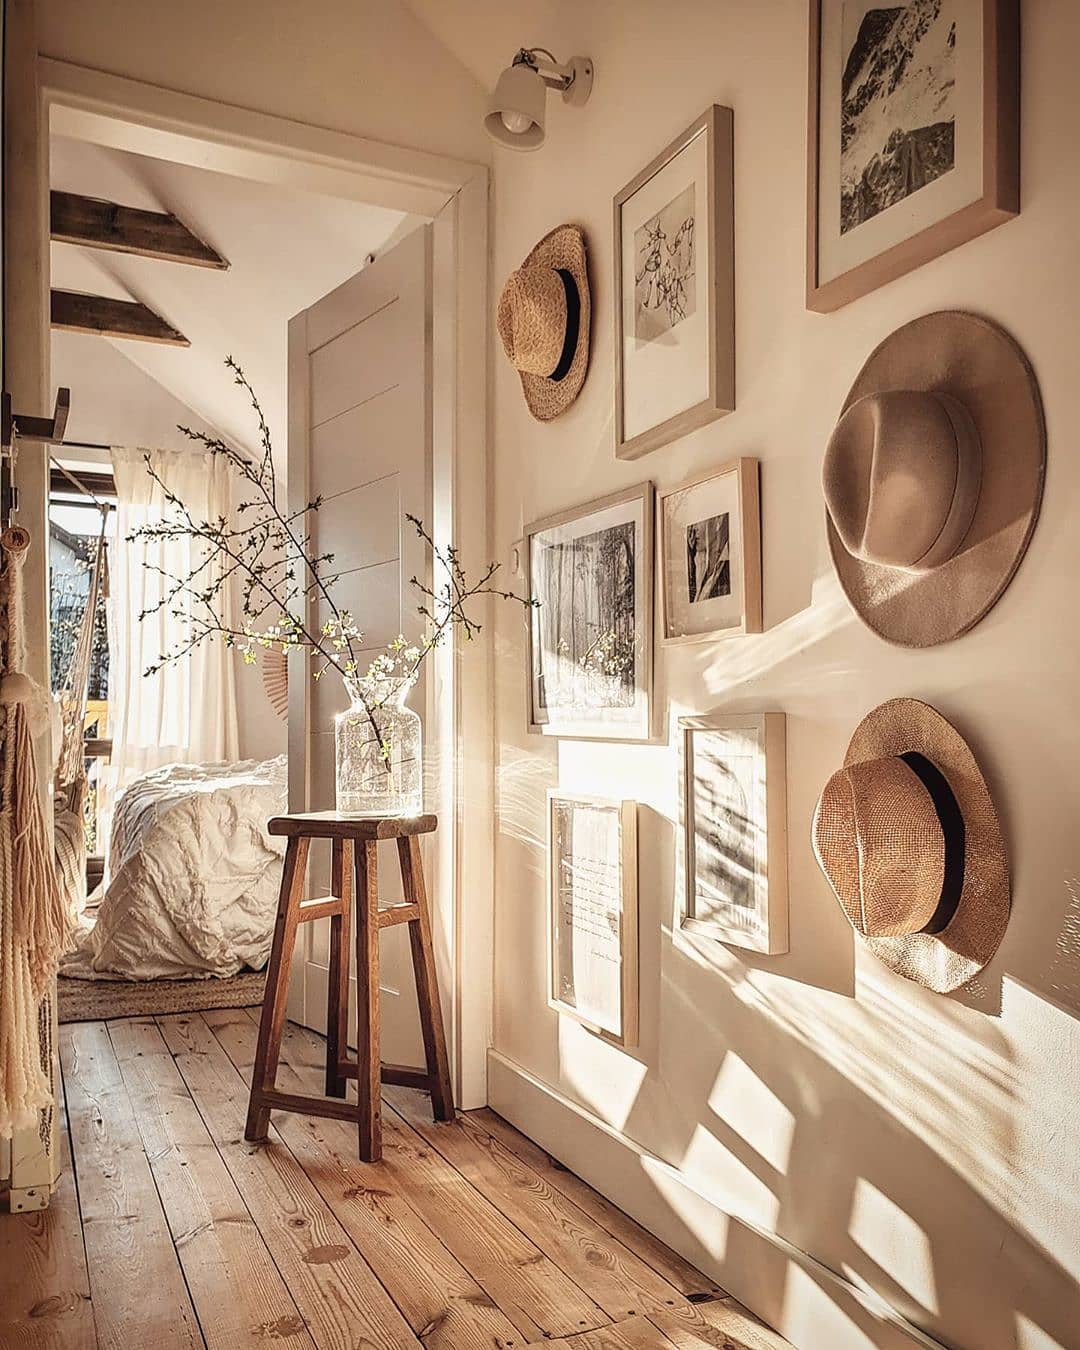 The Art of the Hat: How to Curate a Hat Gallery Wall